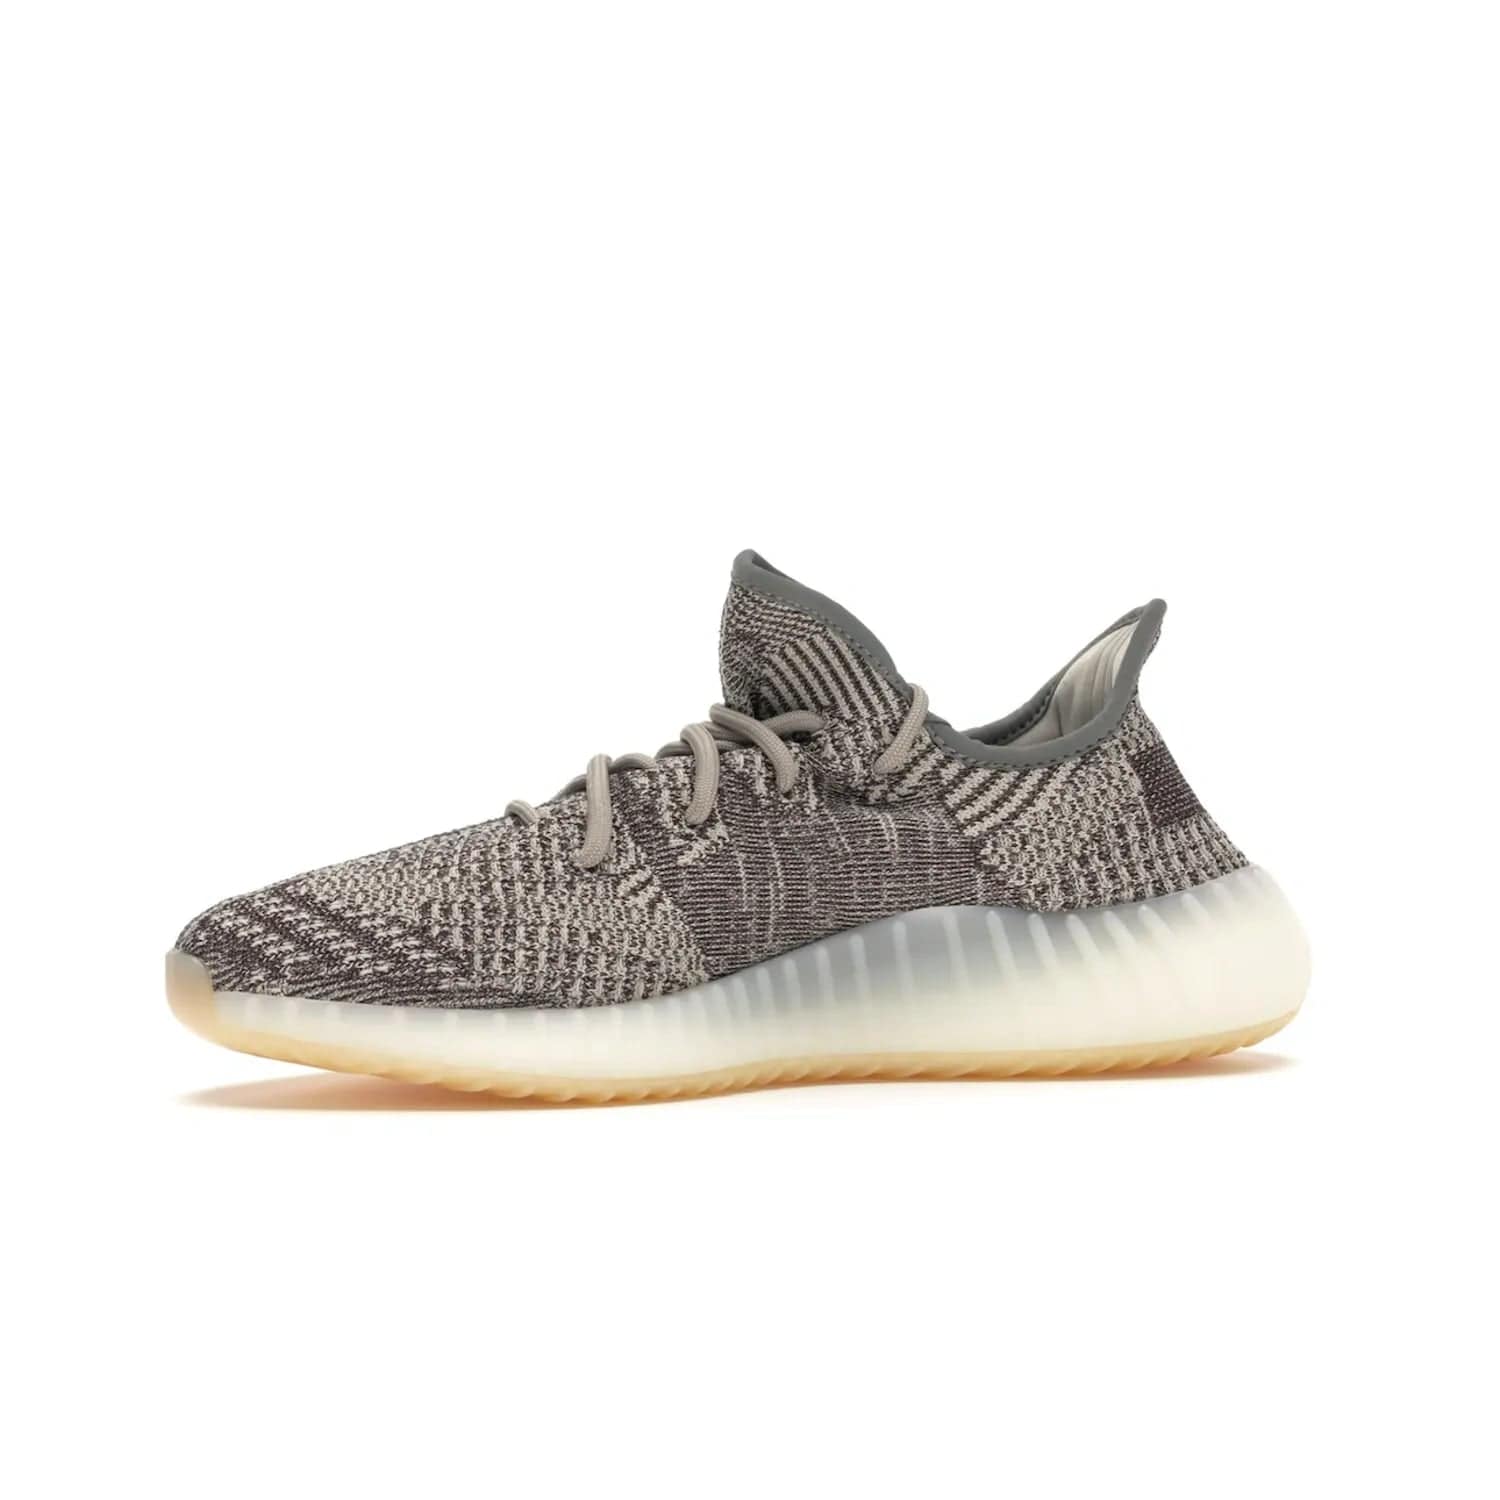 adidas Yeezy Boost 350 V2 Zyon - Image 17 - Only at www.BallersClubKickz.com - Step up your style game with the adidas Yeezy Boost 350 V2 Zyon. This sleek sneaker features a Primeknit upper, dark side stripe, translucent Boost sole, and creamy white interior providing style and comfort. Get them now!